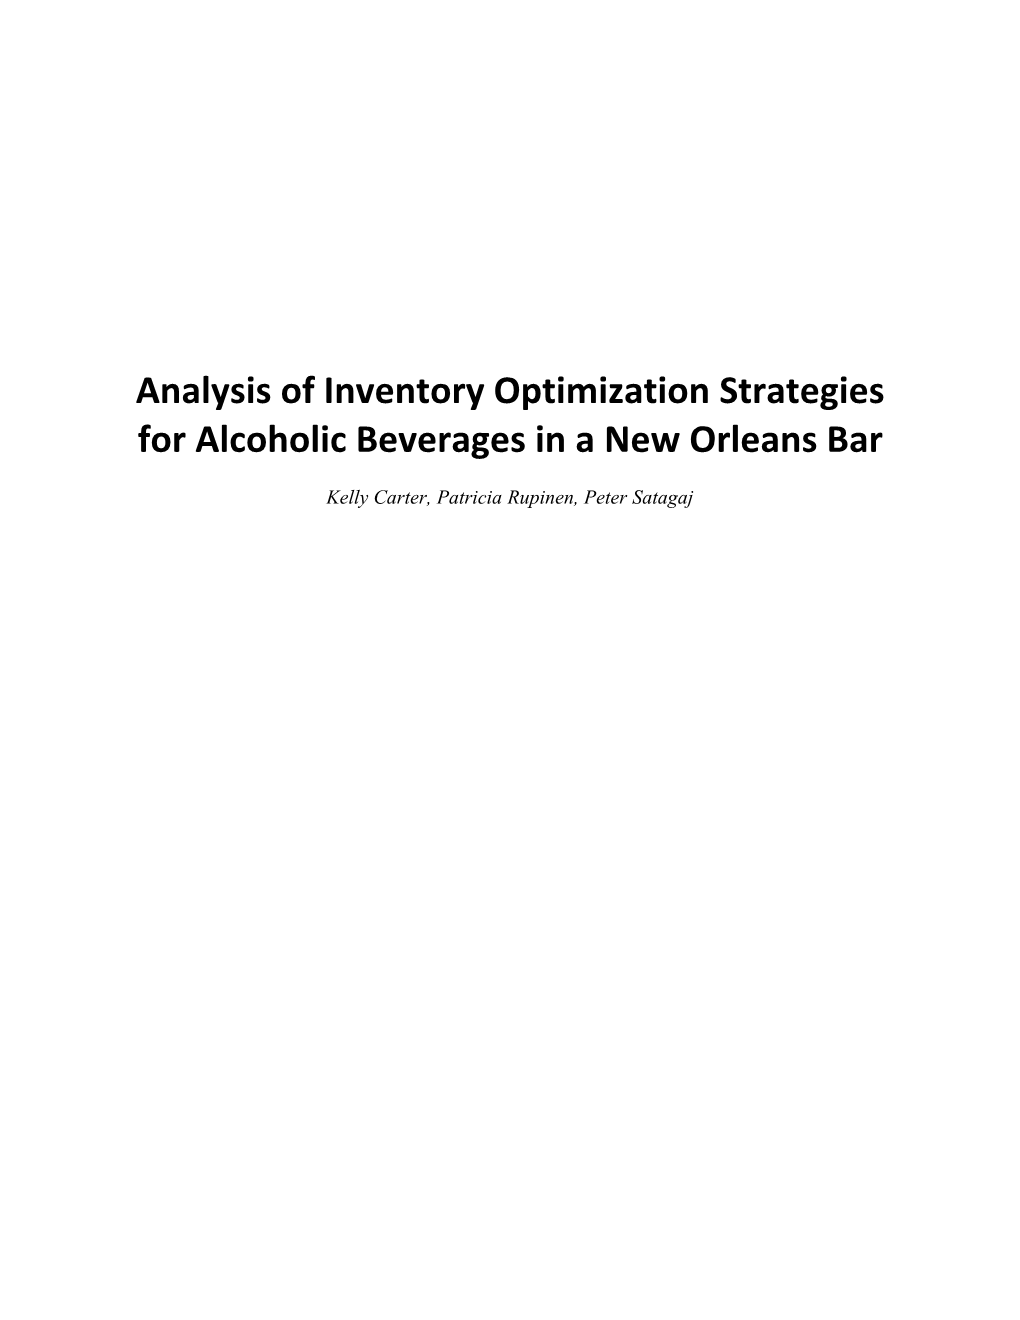 Analysis of Inventory Optimization Strategies for Alcoholic Beverages in a New Orleans Bar